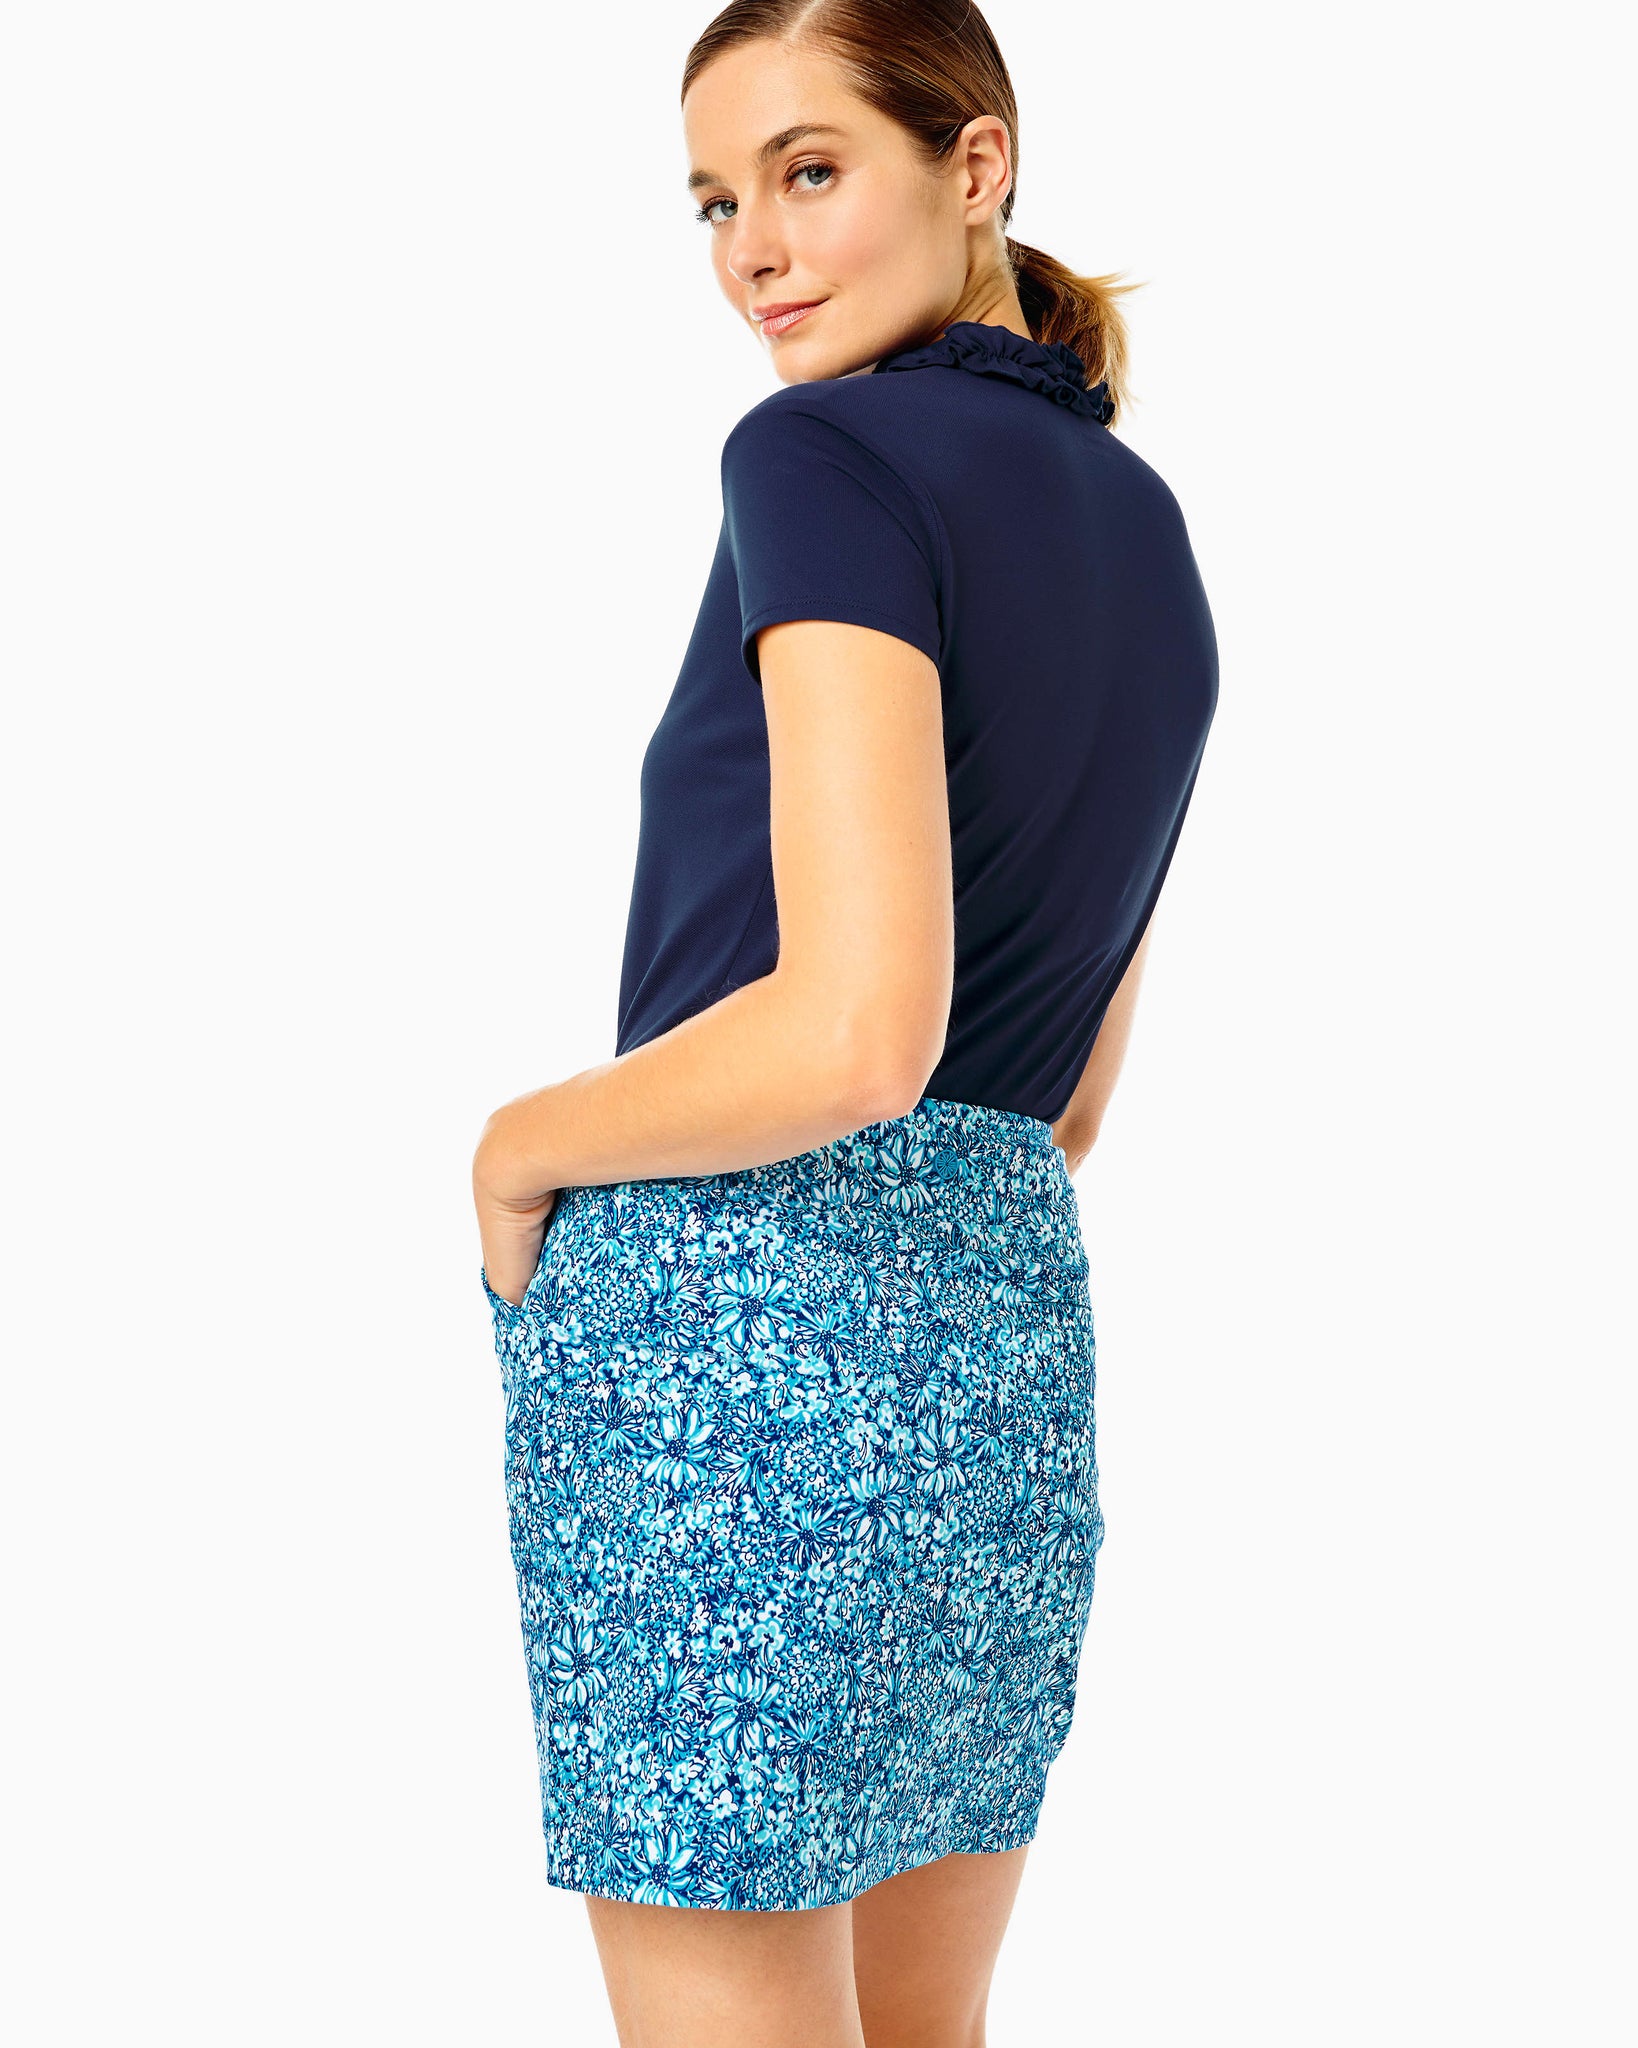 Islands – The UPF Pulitzer Blooming Lilly Luxletic Cumulus Skort Together - Signature Monica 50+ Golf Blue - A Store